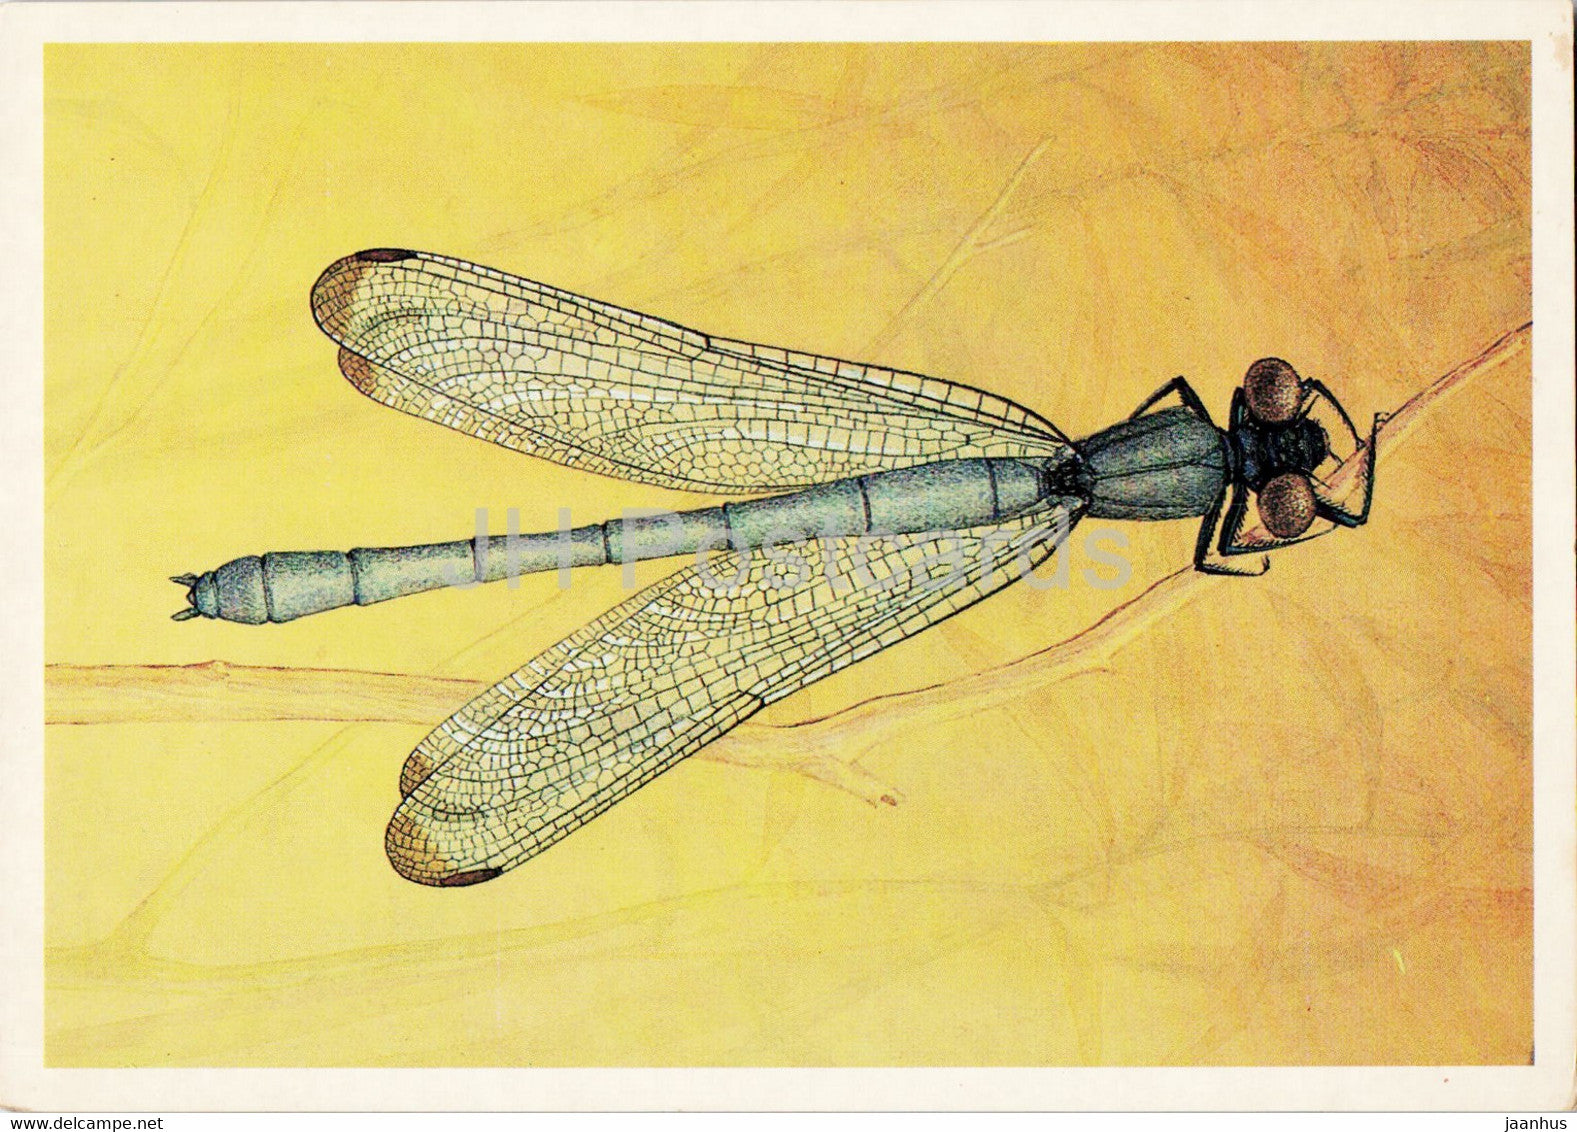 Epallage fatime - dragonfly - Insects - illustration - 1987 - Russia USSR - unused - JH Postcards